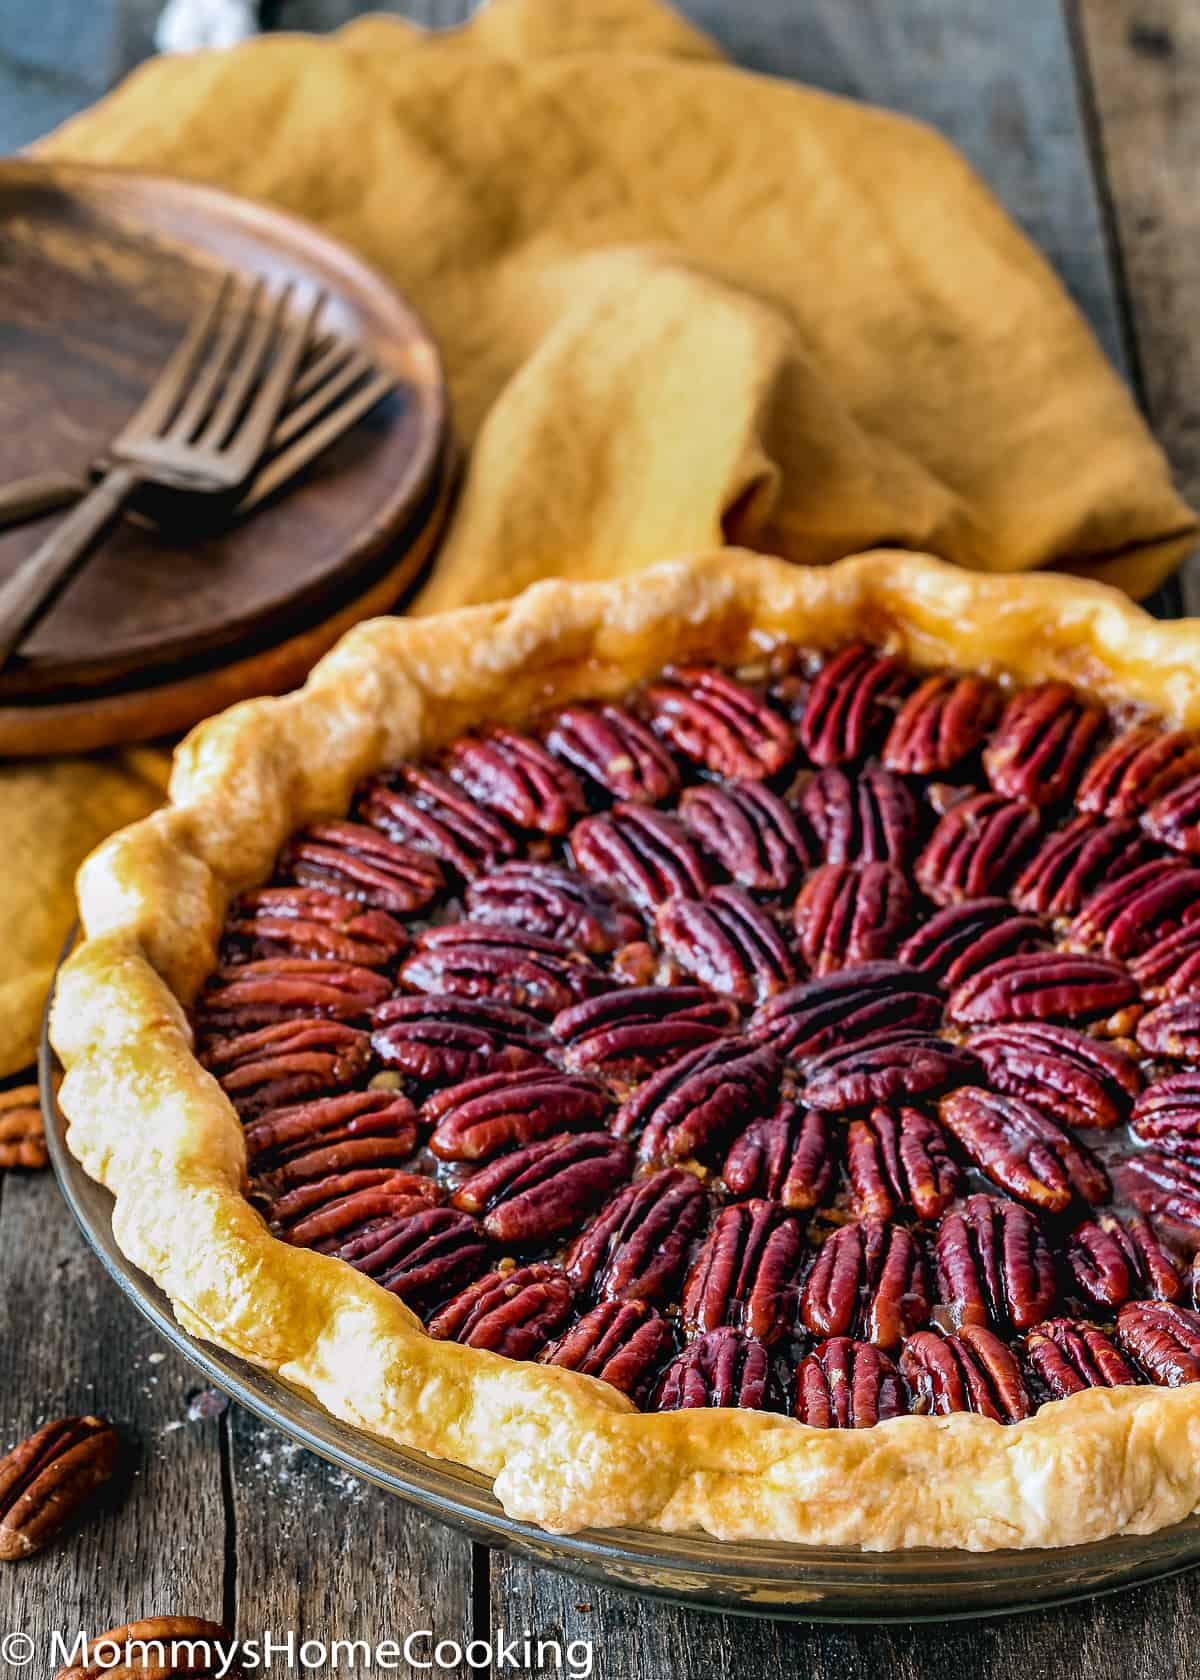 egg-free pecan pie in a pie dish on a wooden surface with plates, forks and napkin on the background 